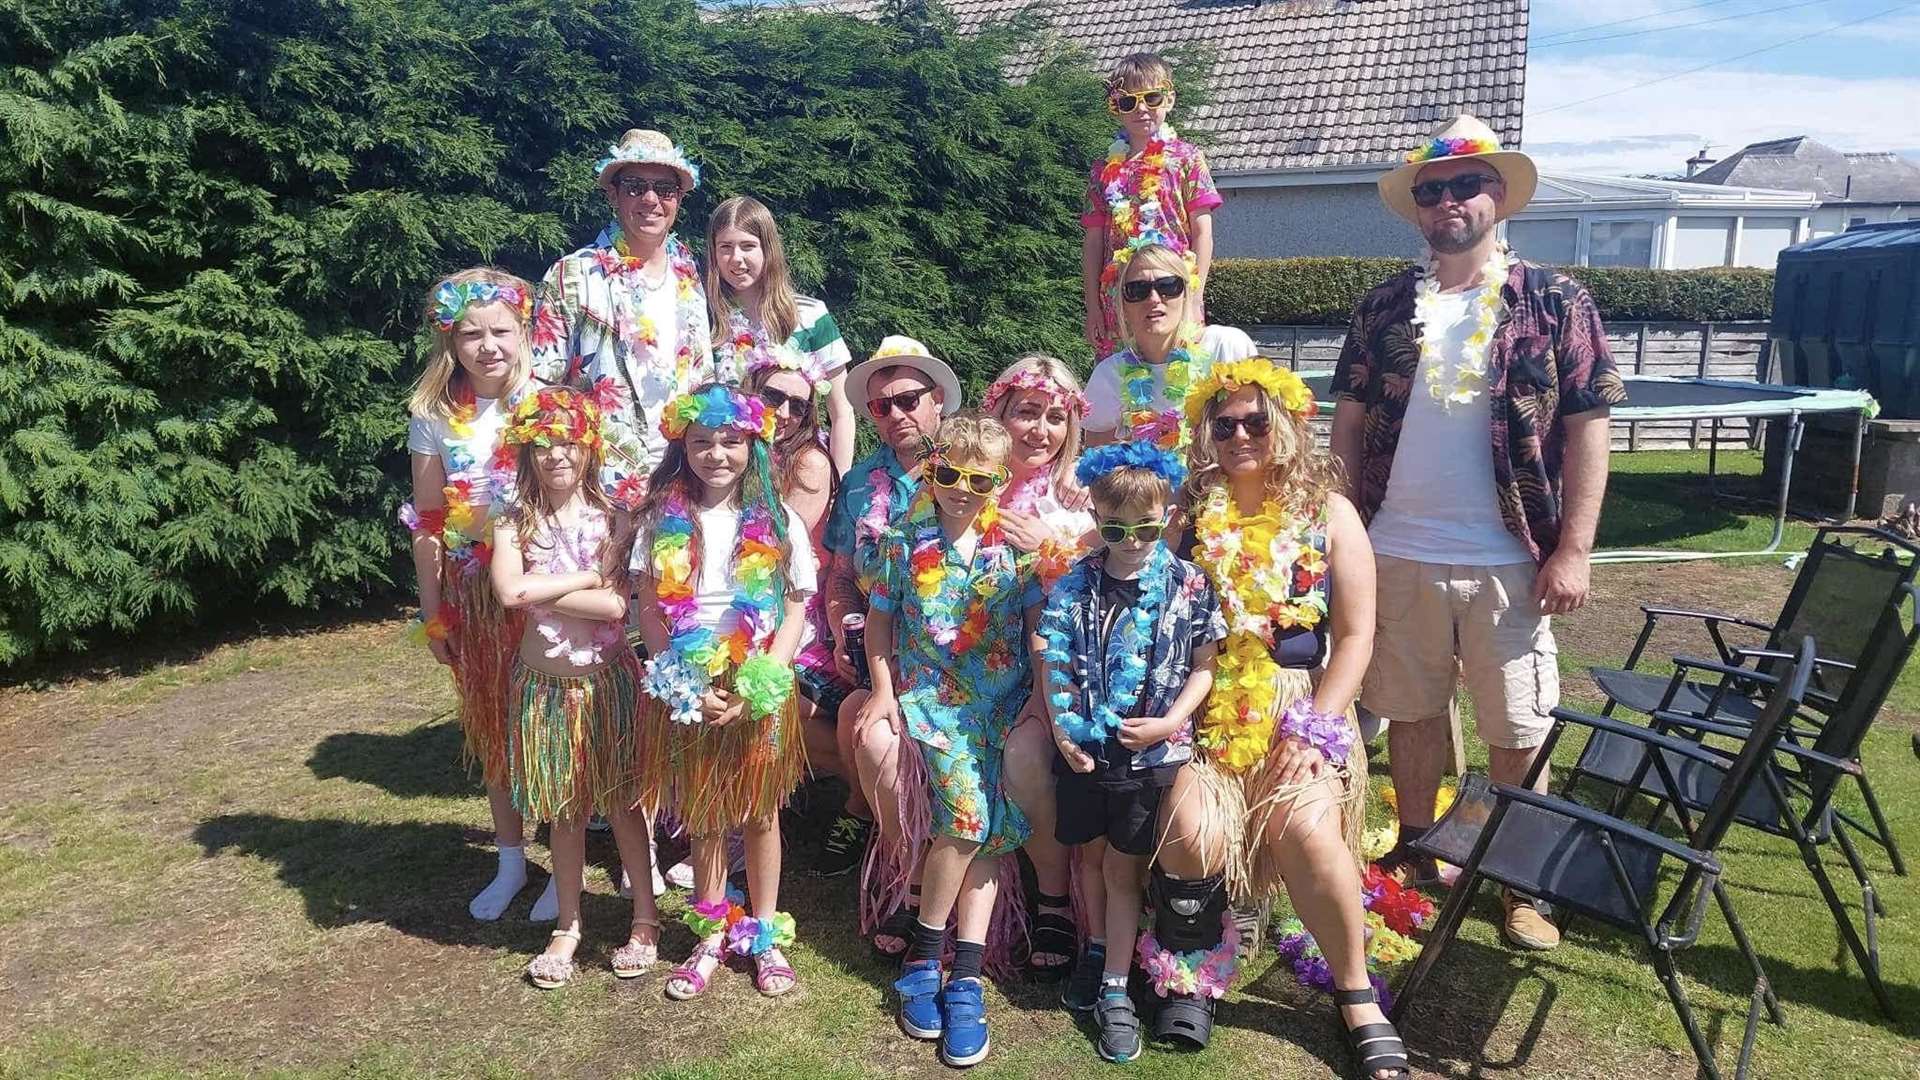 Aloha Brora - this group chose a Hawaiian theme for the fancy dress competition.